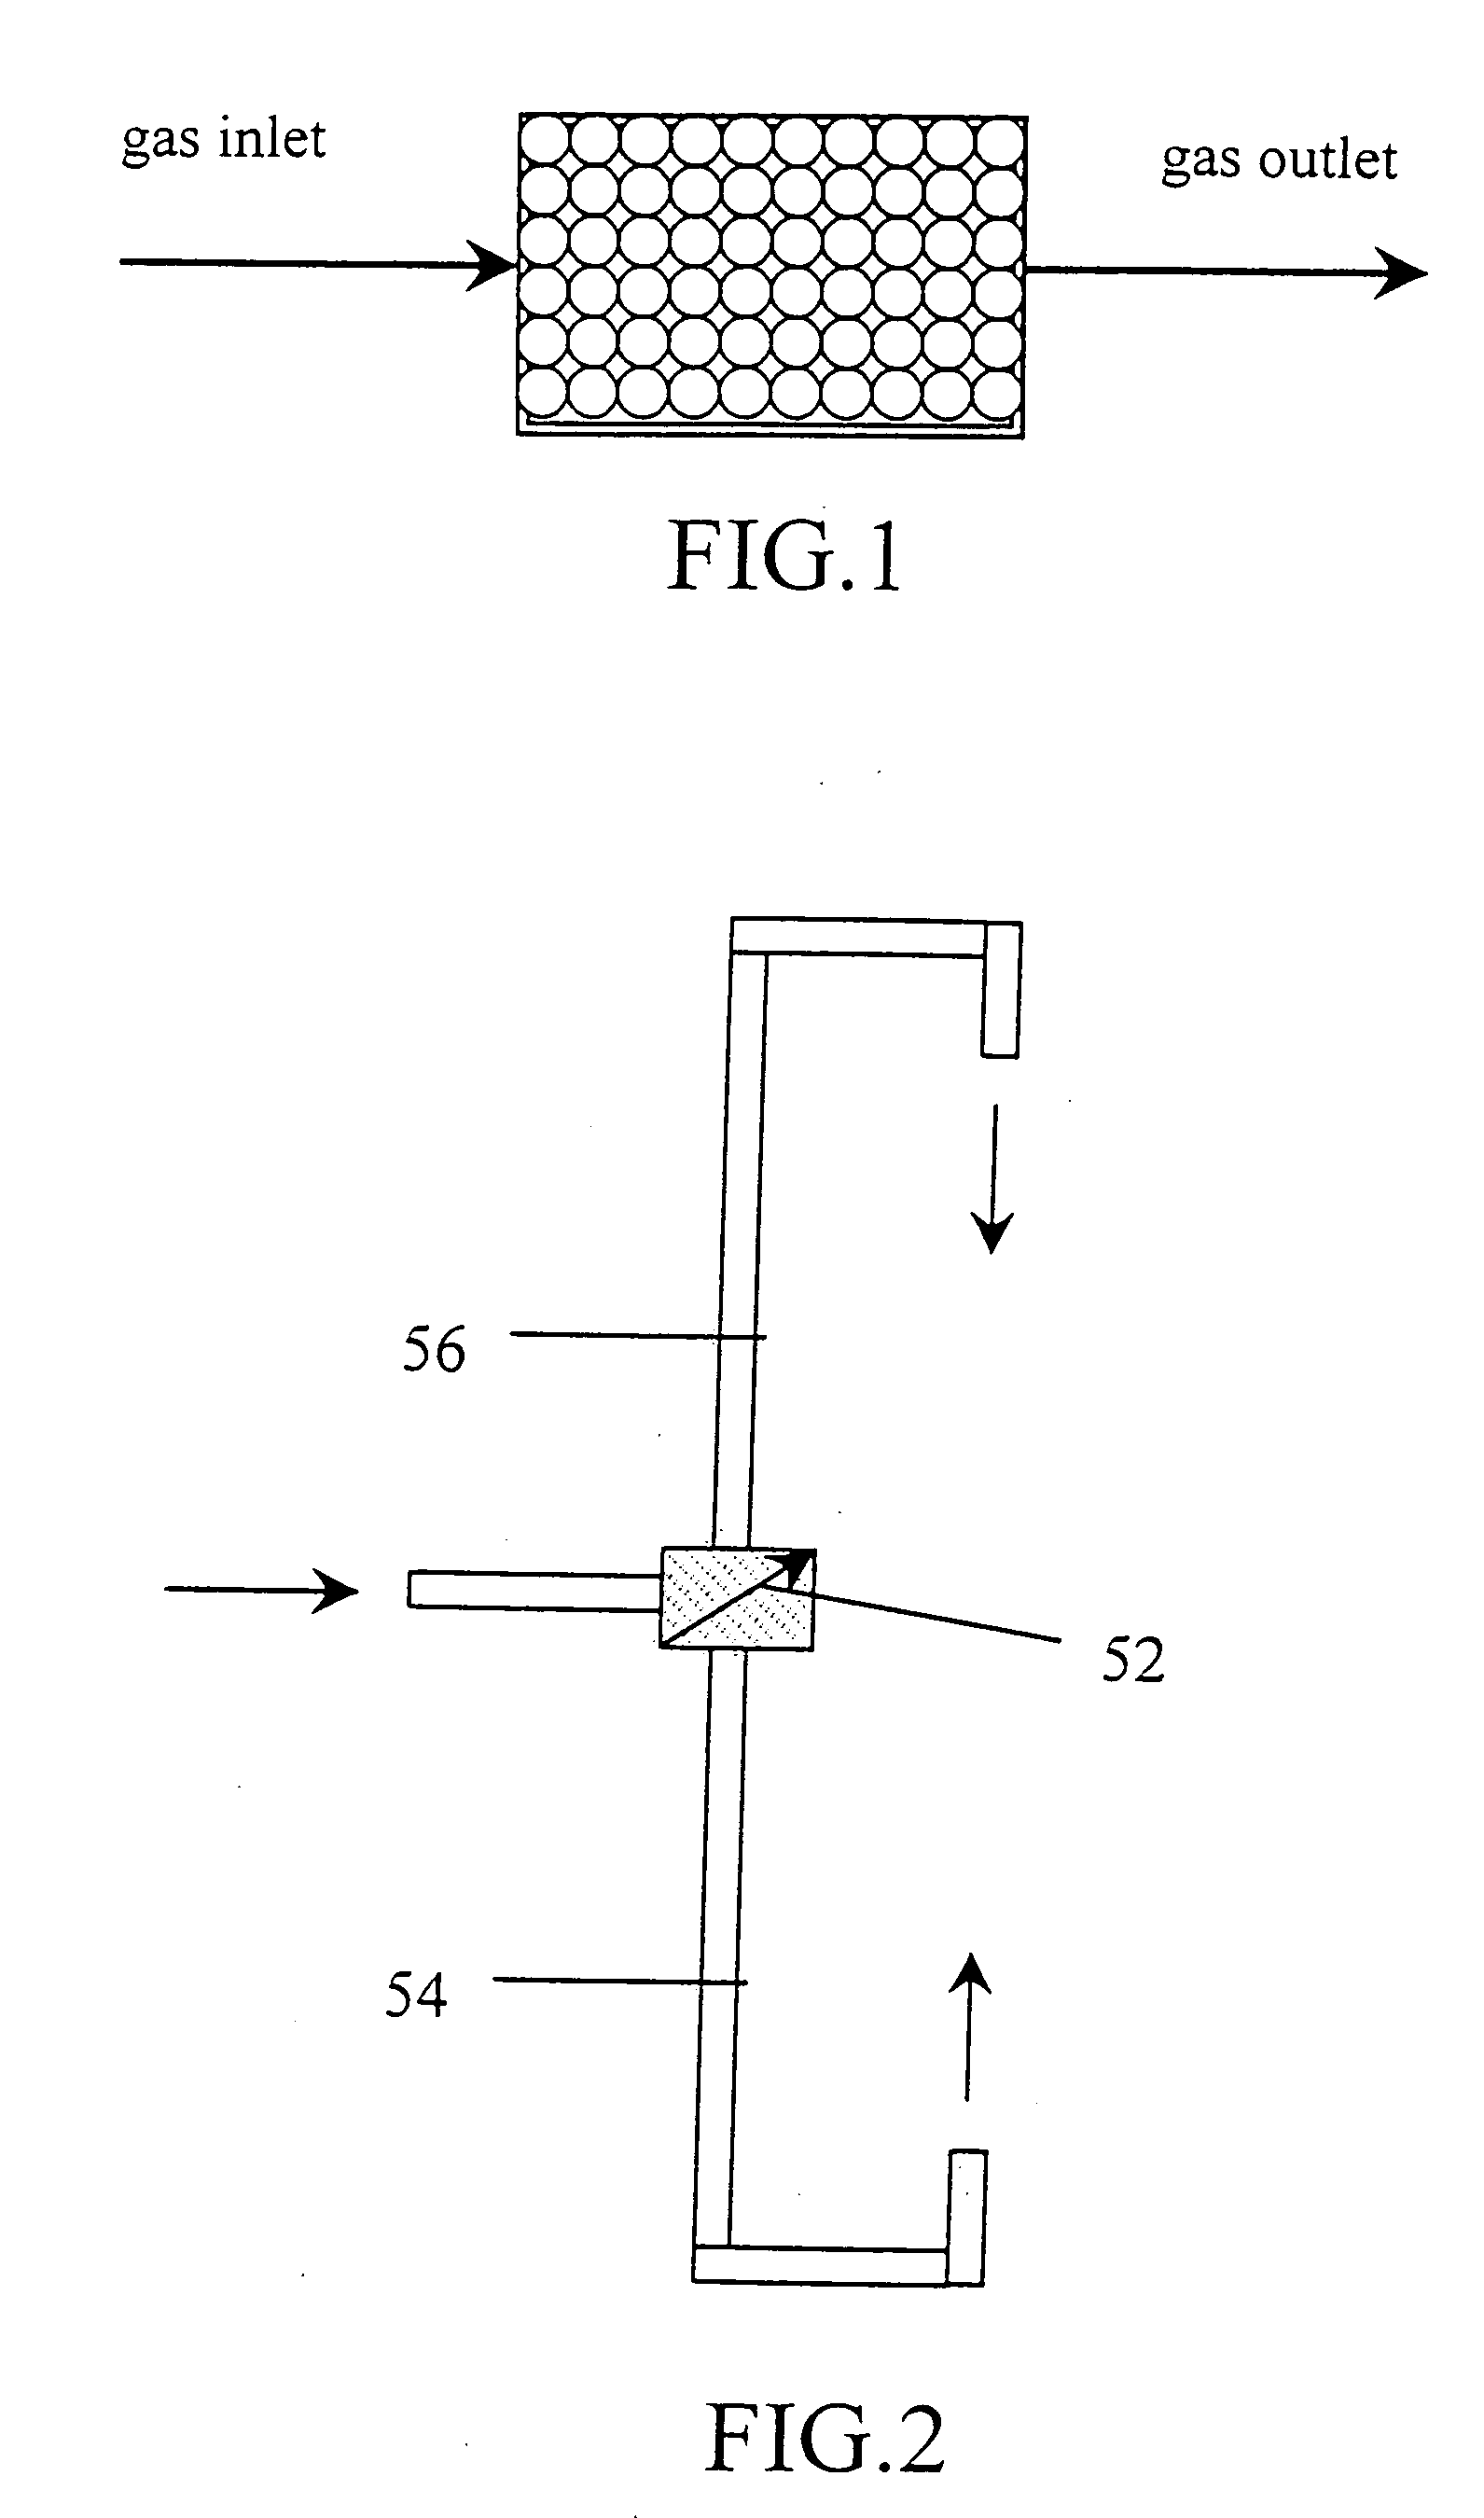 System and process for treating waste gas employing bio-treatment technology